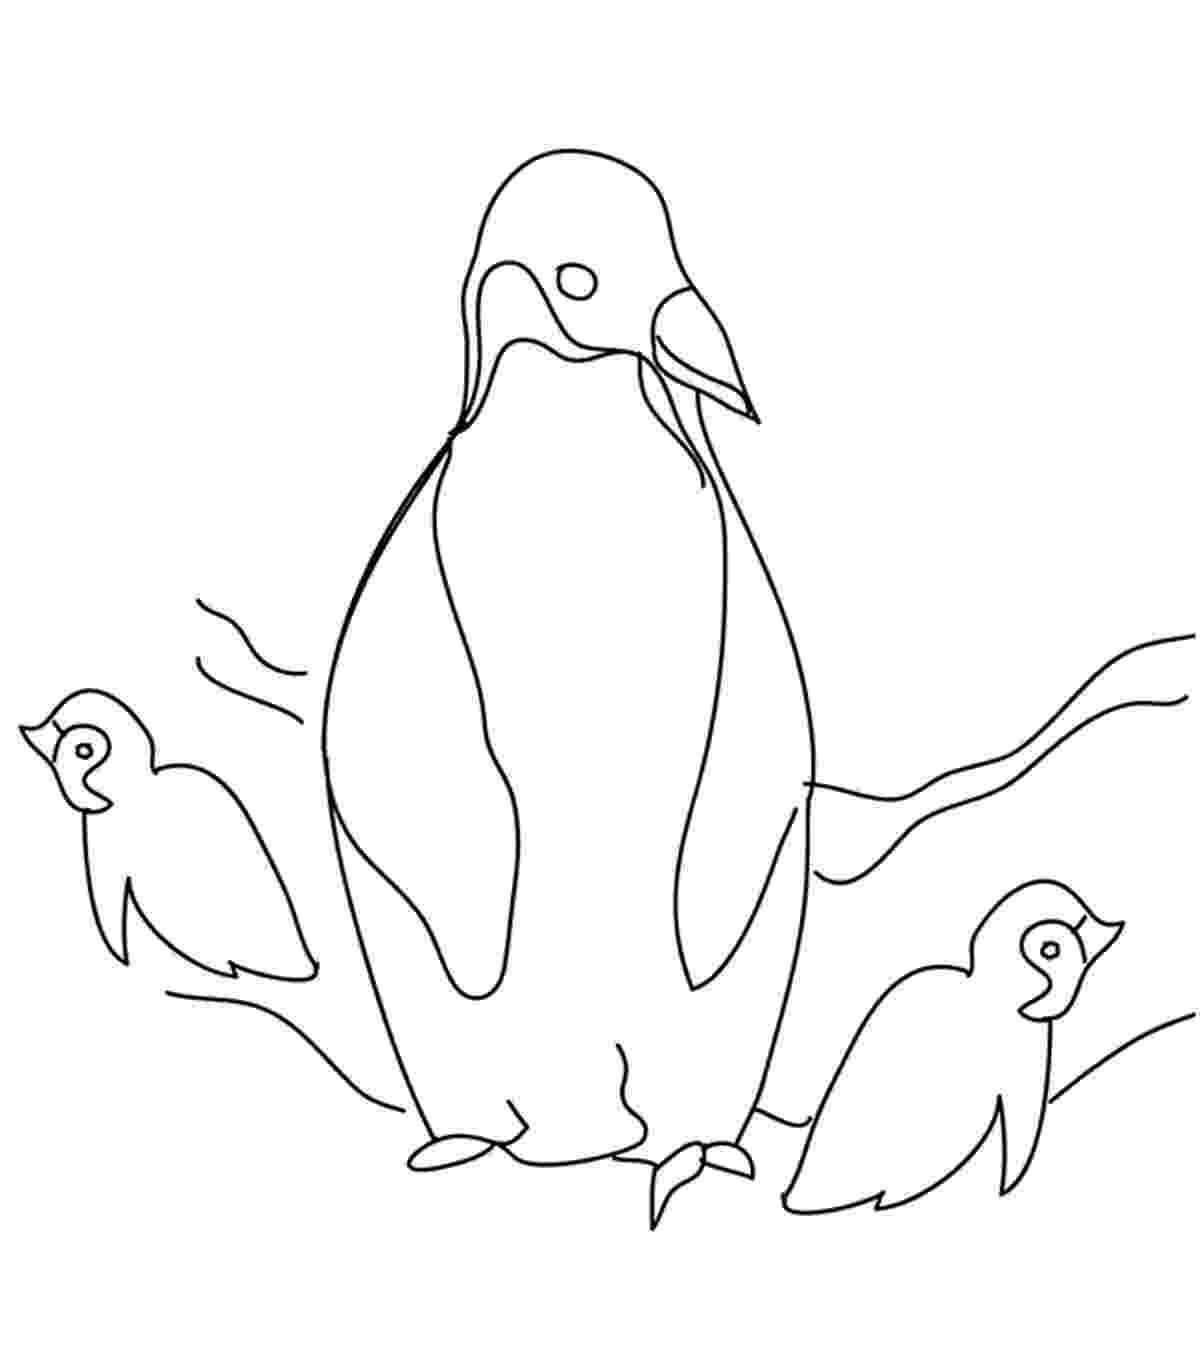 penguin colouring pictures free printable penguin coloring pages for kids colouring pictures penguin 